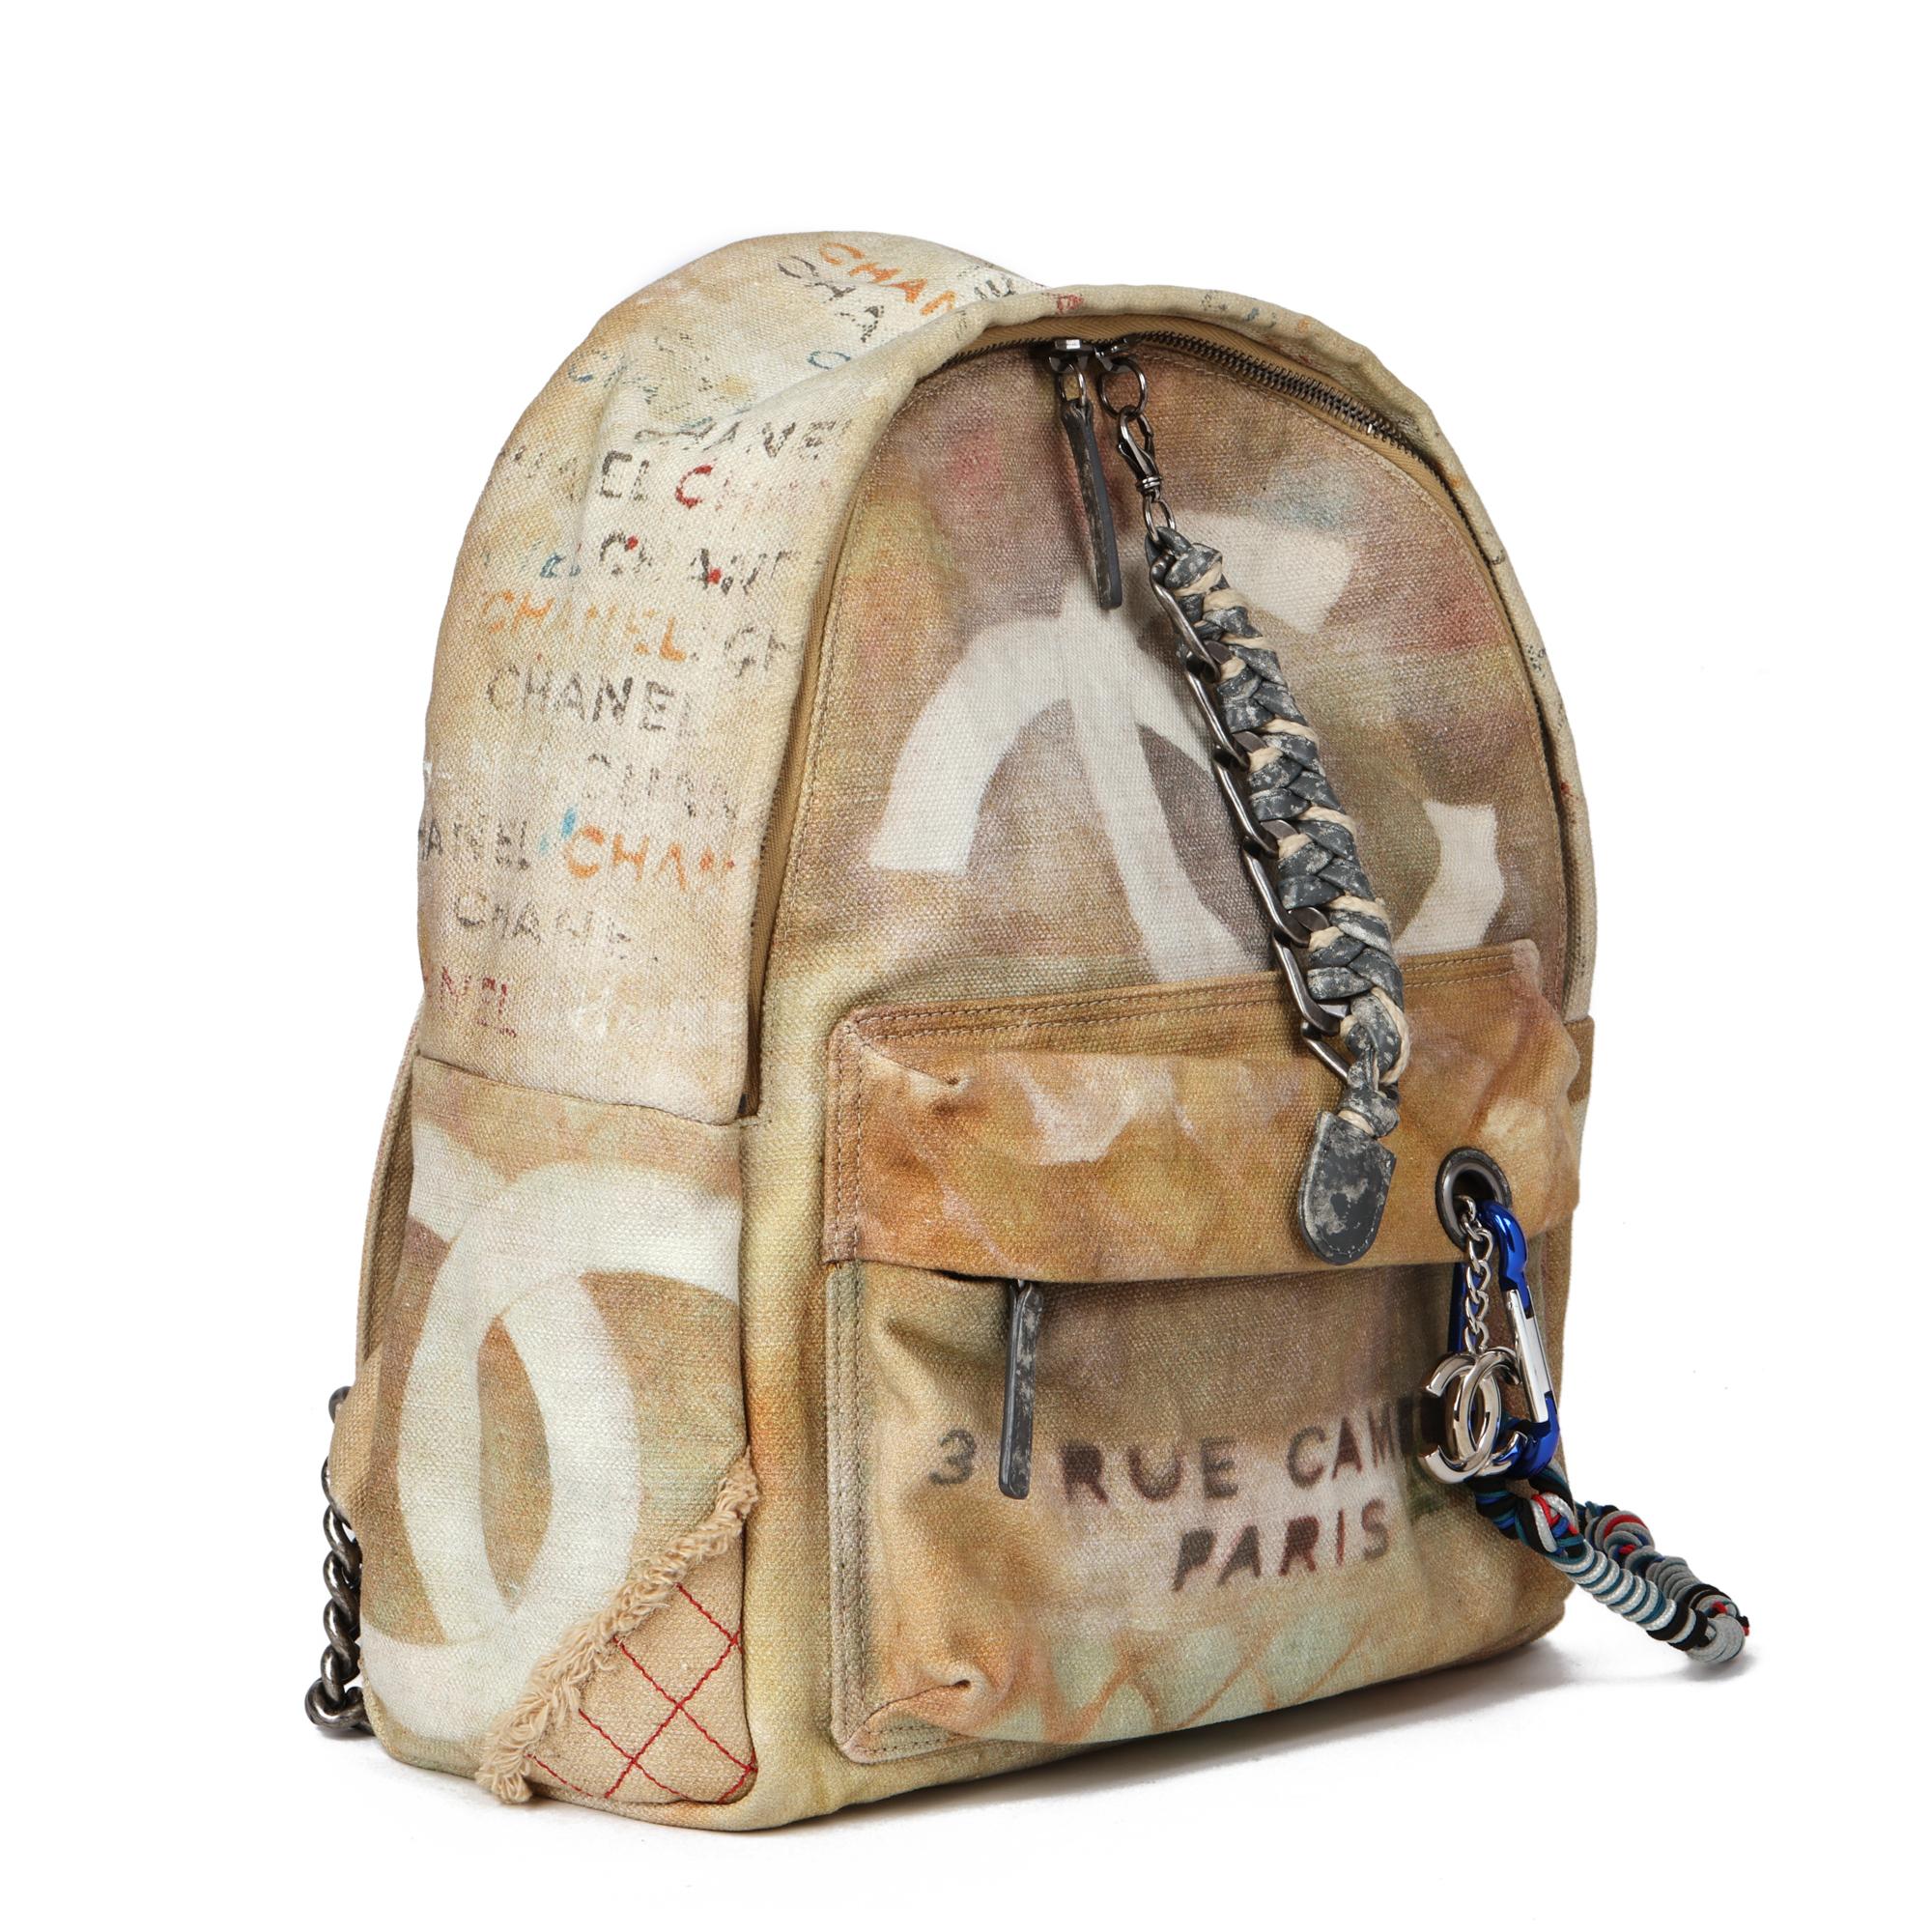 CHANEL 
Beige Painted Canvas Medium Graffiti Backpack

Xupes Reference: HB4552
Serial Number: 19445572
Age (Circa): 2014
Accompanied By: Chanel Dust Bag, Luggage Tag
Authenticity Details: Serial Sticker (Made in Italy)
Gender: Unisex
Type: